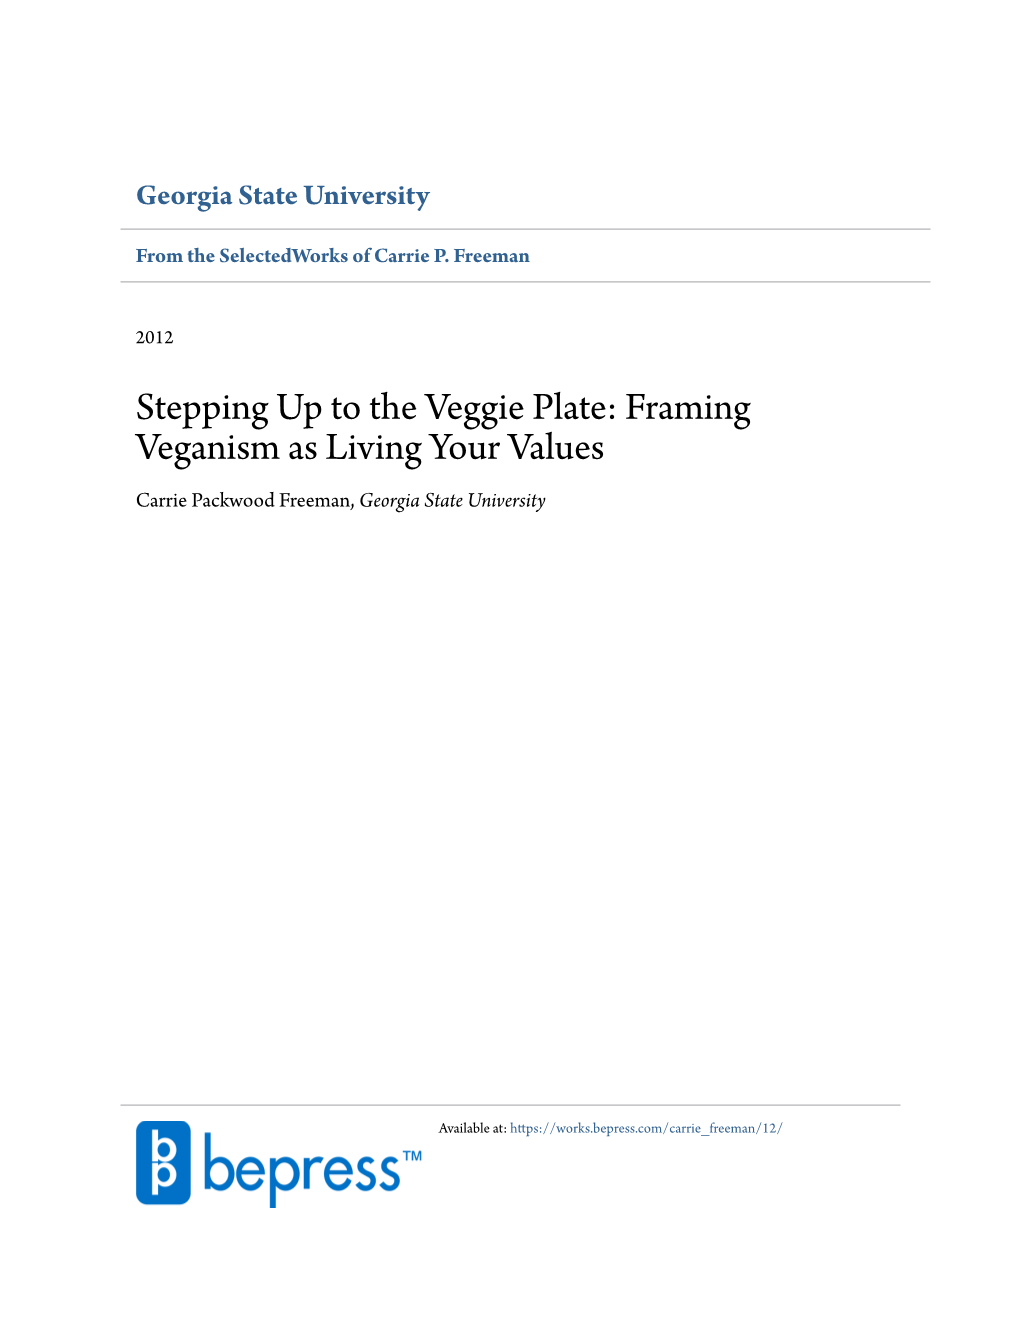 Stepping up to the Veggie Plate: Framing Veganism As Living Your Values Carrie Packwood Freeman, Georgia State University